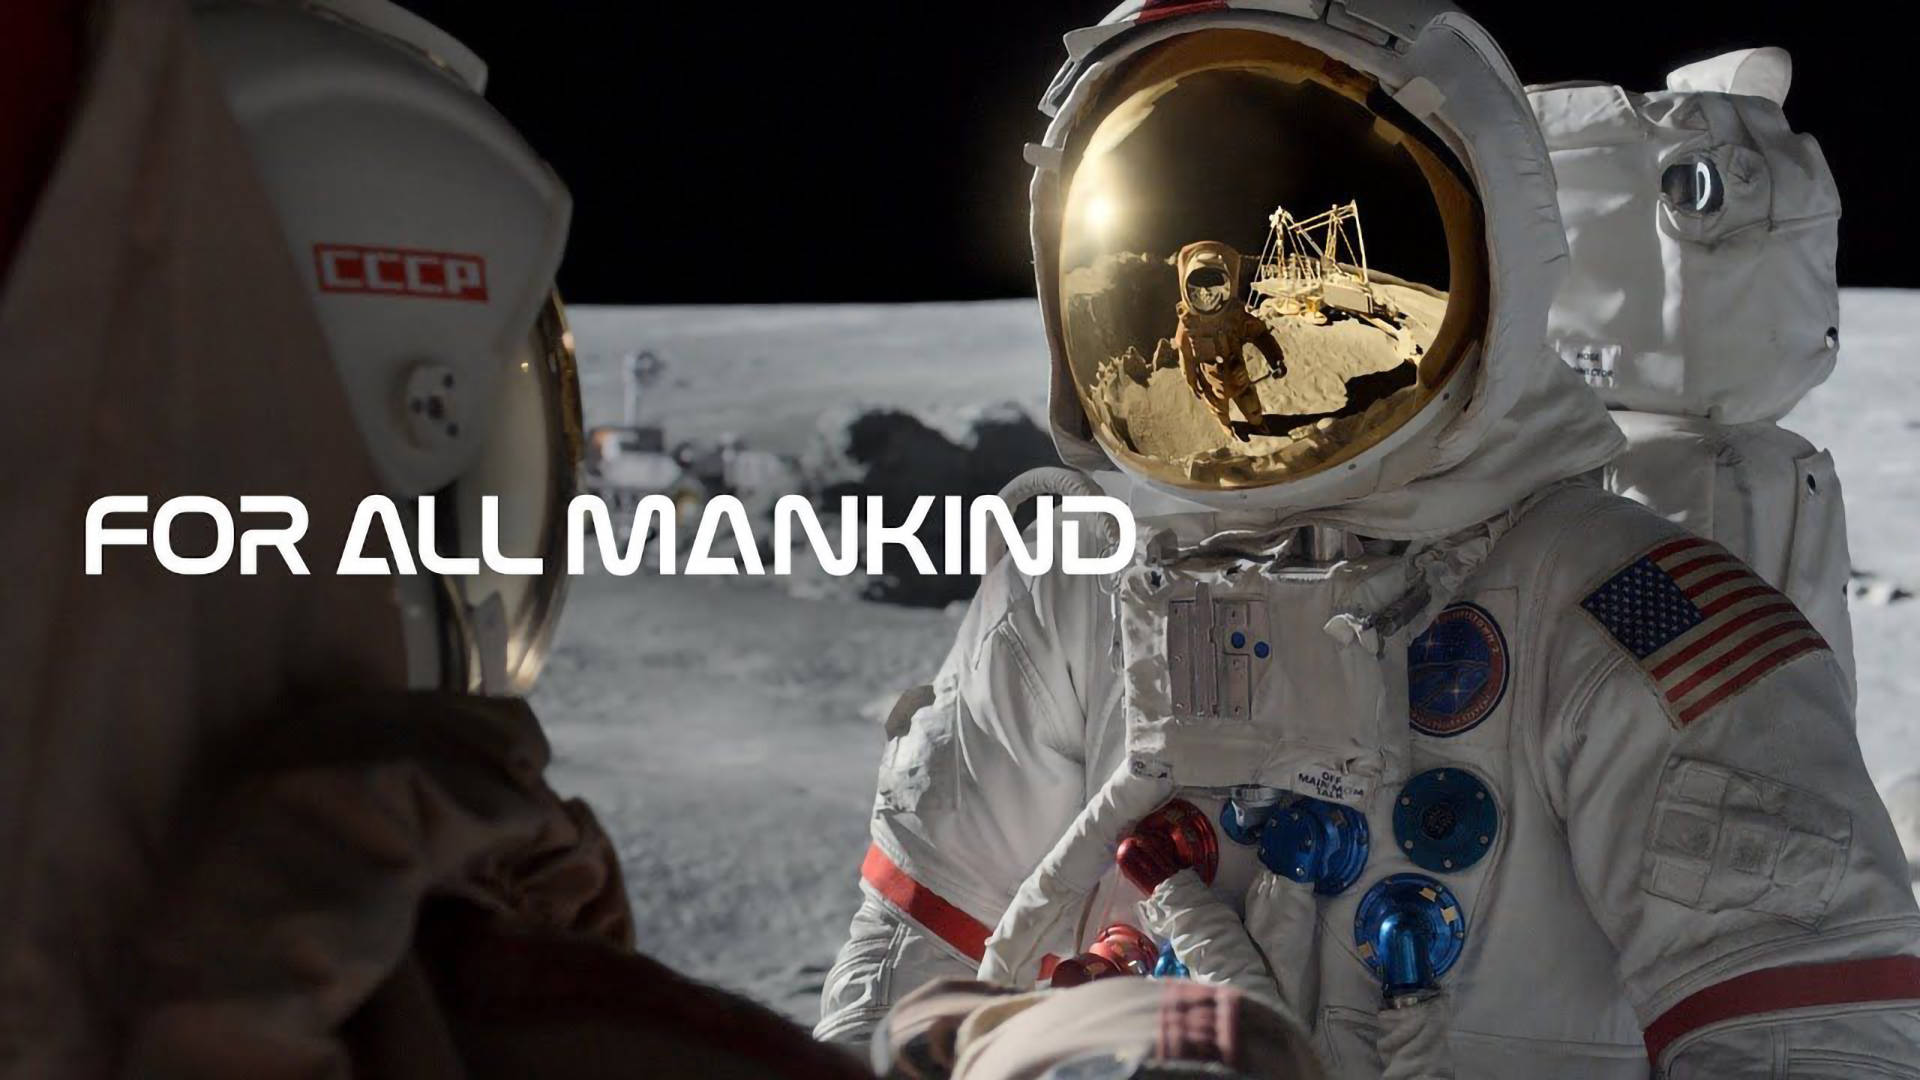 For All Mankind Two Astronauts On Moon Wallpaper